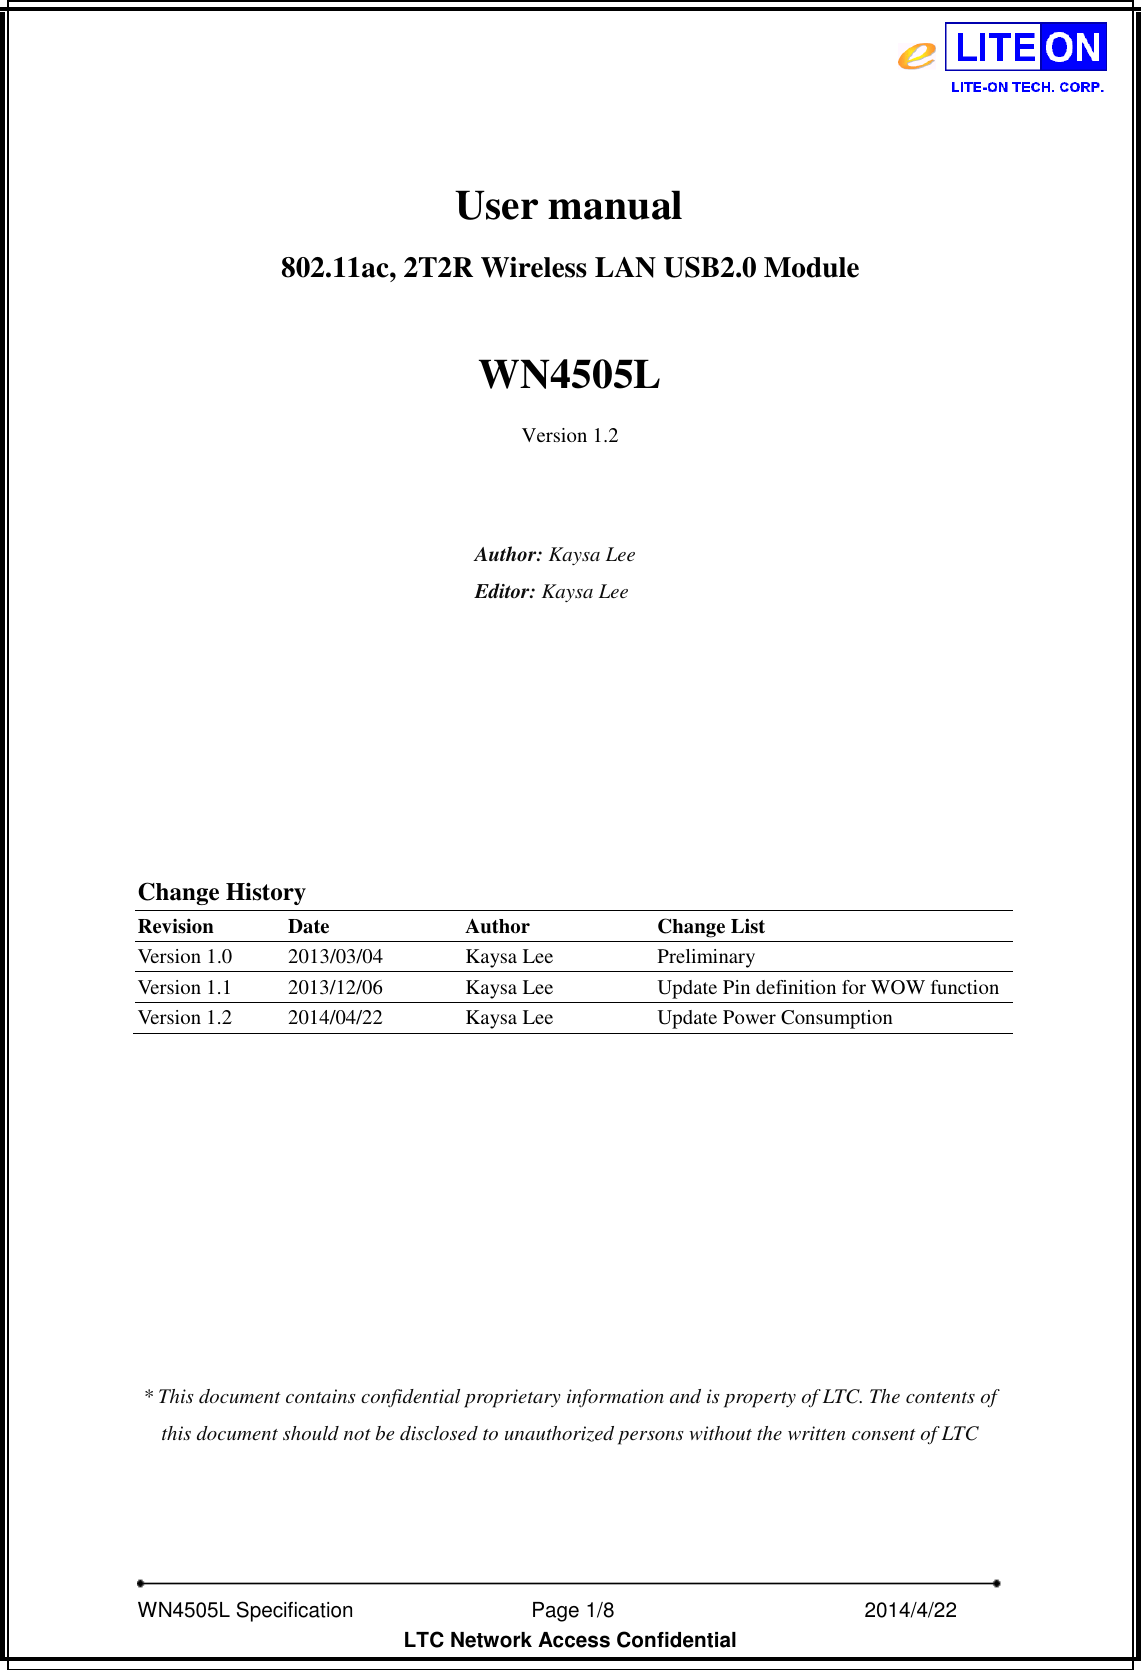   WN4505L Specification                              Page 1/8                                                2014/4/22   LTC Network Access Confidential                 User manual802.11ac, 2T2R Wireless LAN USB2.0 Module    WN4505L Version 1.2   Author: Kaysa Lee Editor: Kaysa Lee          Change History Revision Date Author Change List Version 1.0 2013/03/04 Kaysa Lee Preliminary Version 1.1 2013/12/06 Kaysa Lee Update Pin definition for WOW function Version 1.2 2014/04/22 Kaysa Lee Update Power Consumption          * This document contains confidential proprietary information and is property of LTC. The contents of this document should not be disclosed to unauthorized persons without the written consent of LTC 